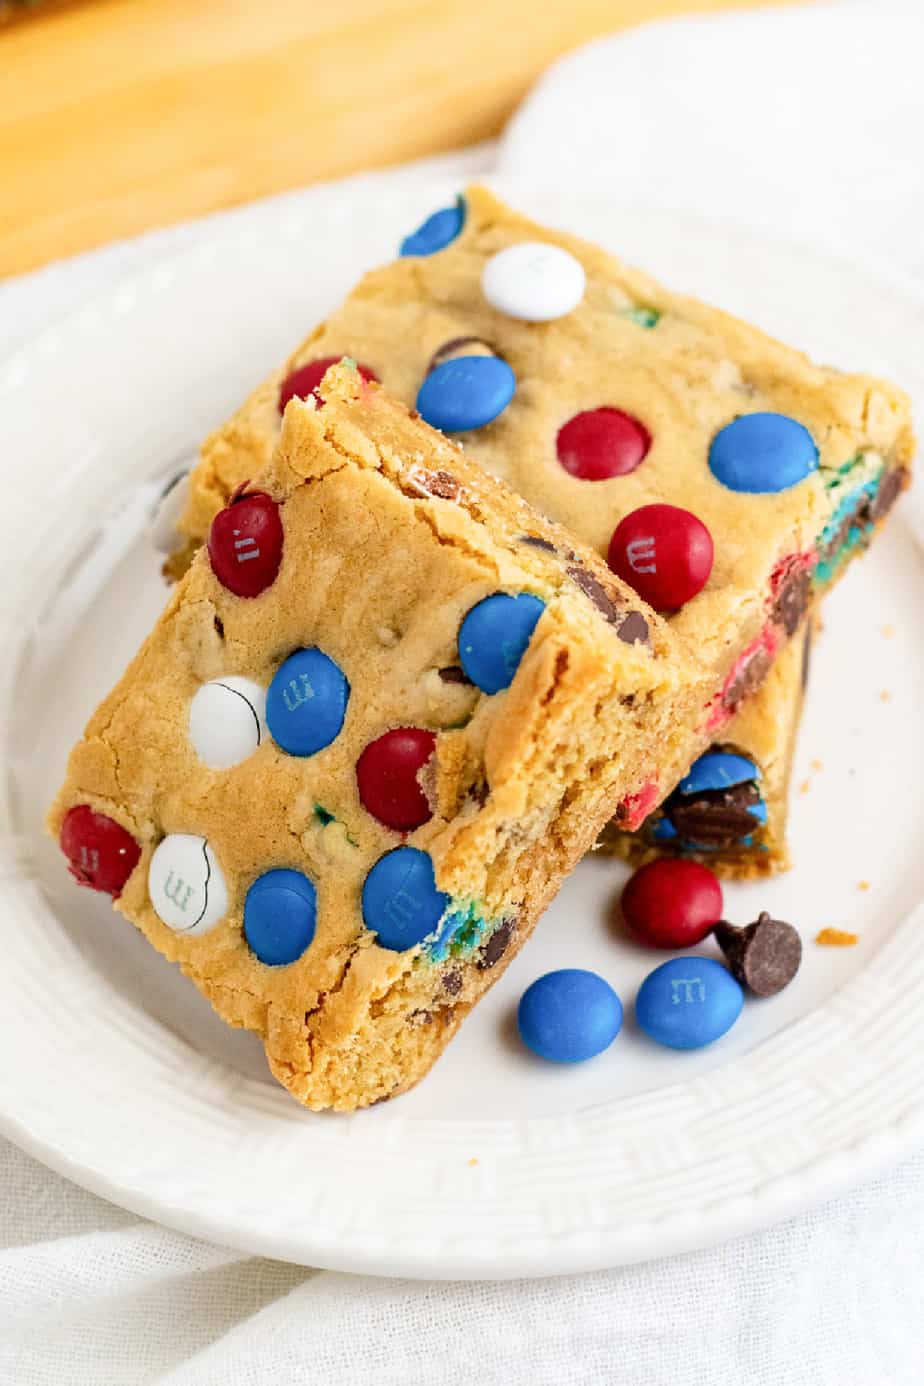 Cookie bars stacked on a plate from the side with red, white and blue MM candies on top of the bars.